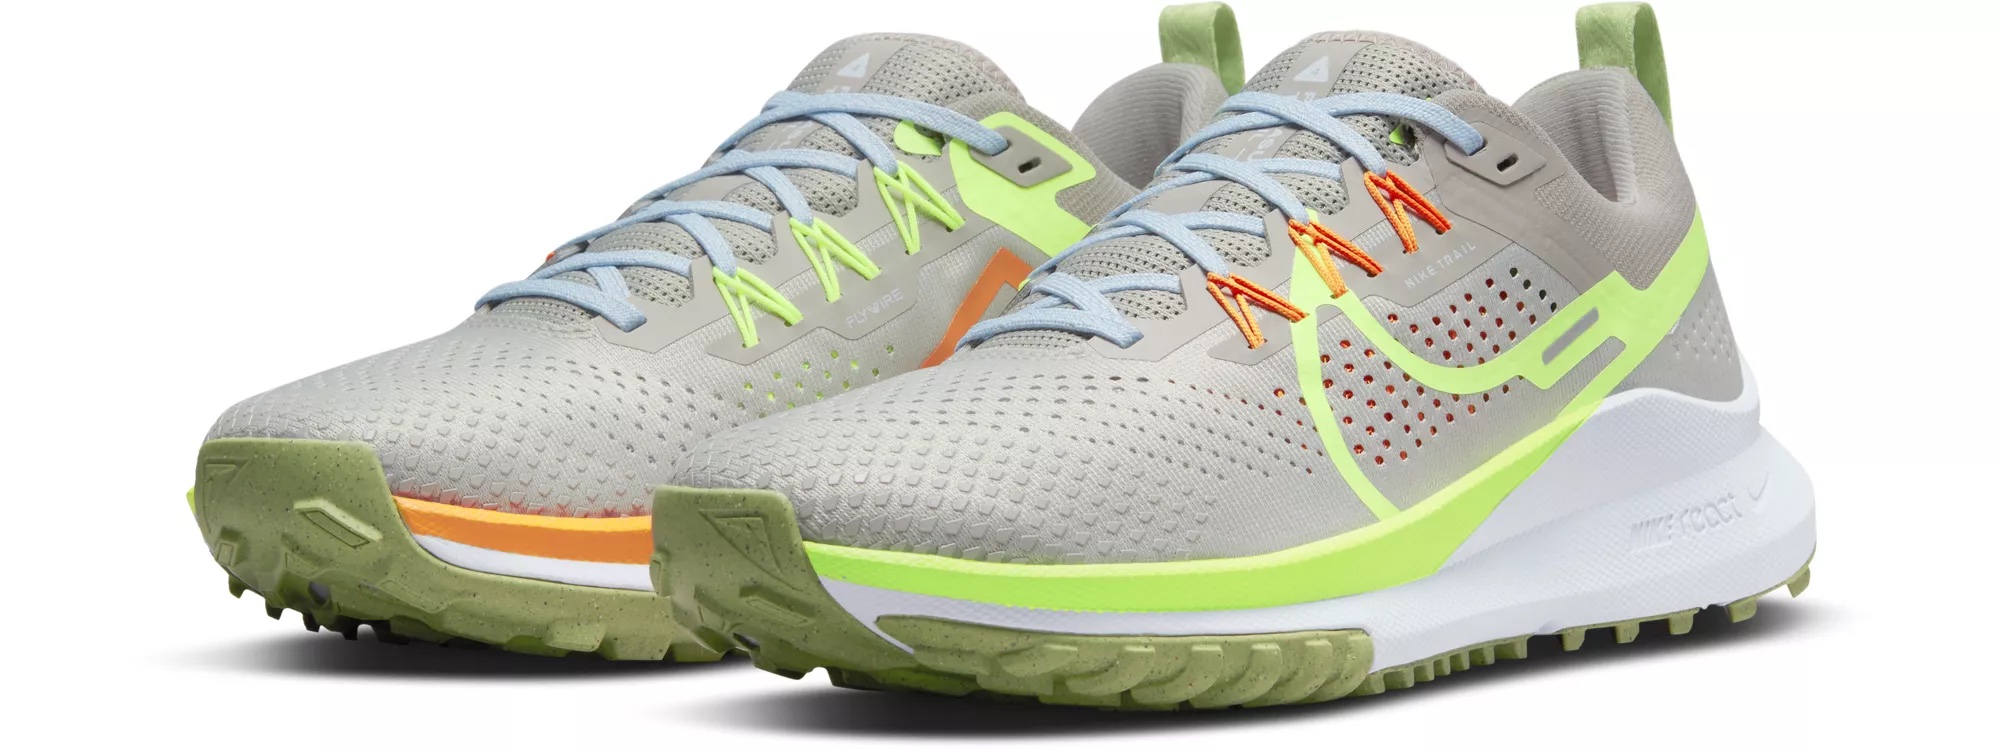 These Nike Men's Pegasus Trail 4 Trail Running Shoes Are Only $71.97 ...